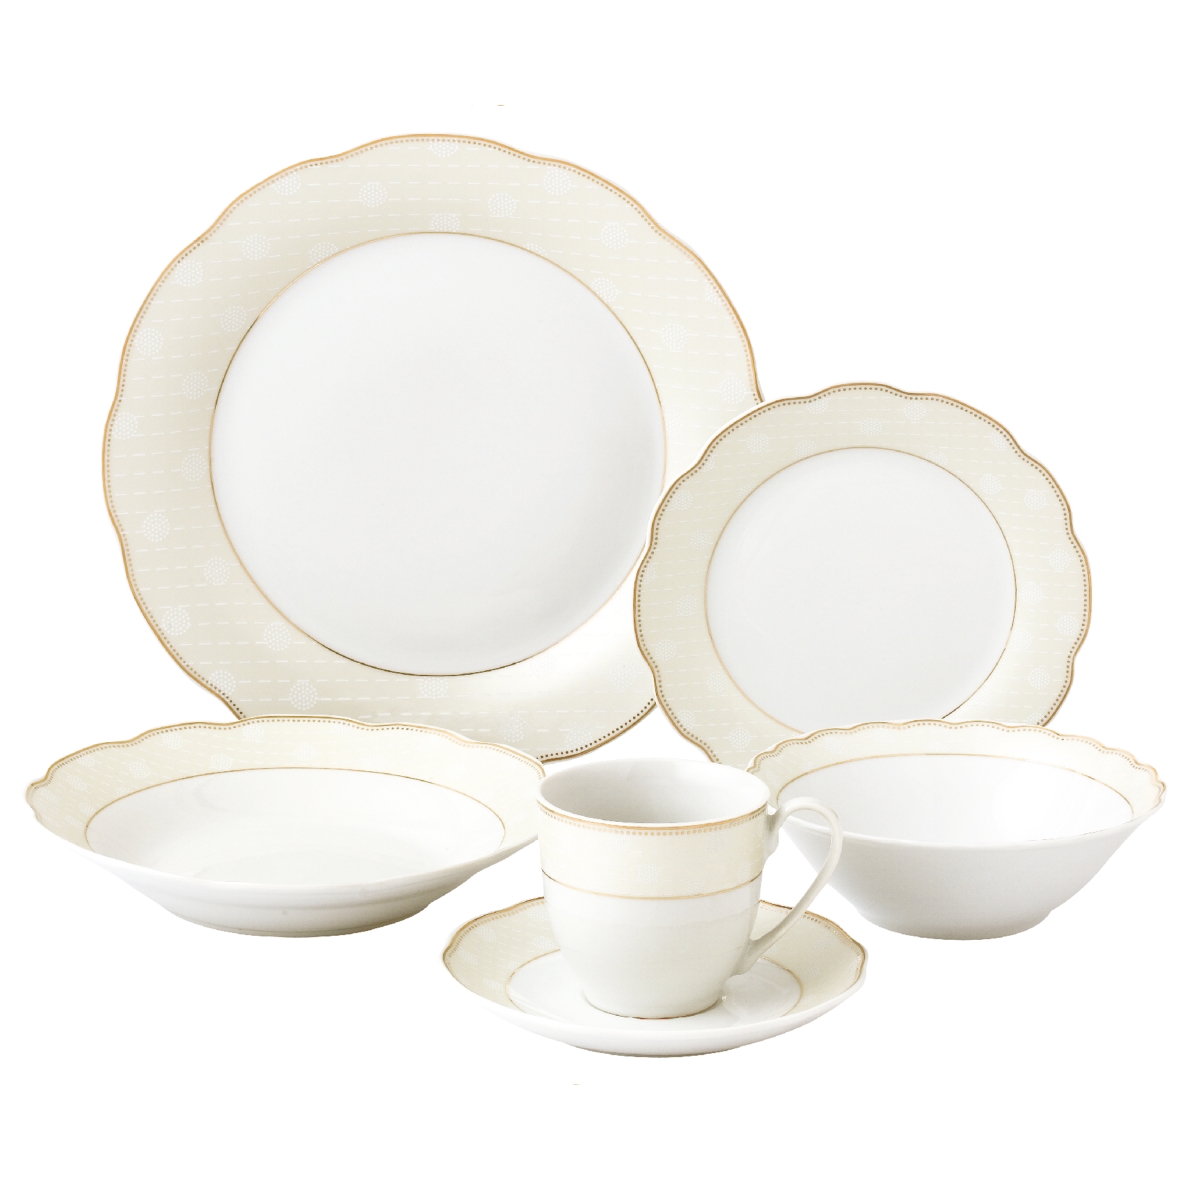 Picture of Lorenzo Import LH434 24 Piece Wavy Dinnerware & Porcelain - Service for 4 - Tova